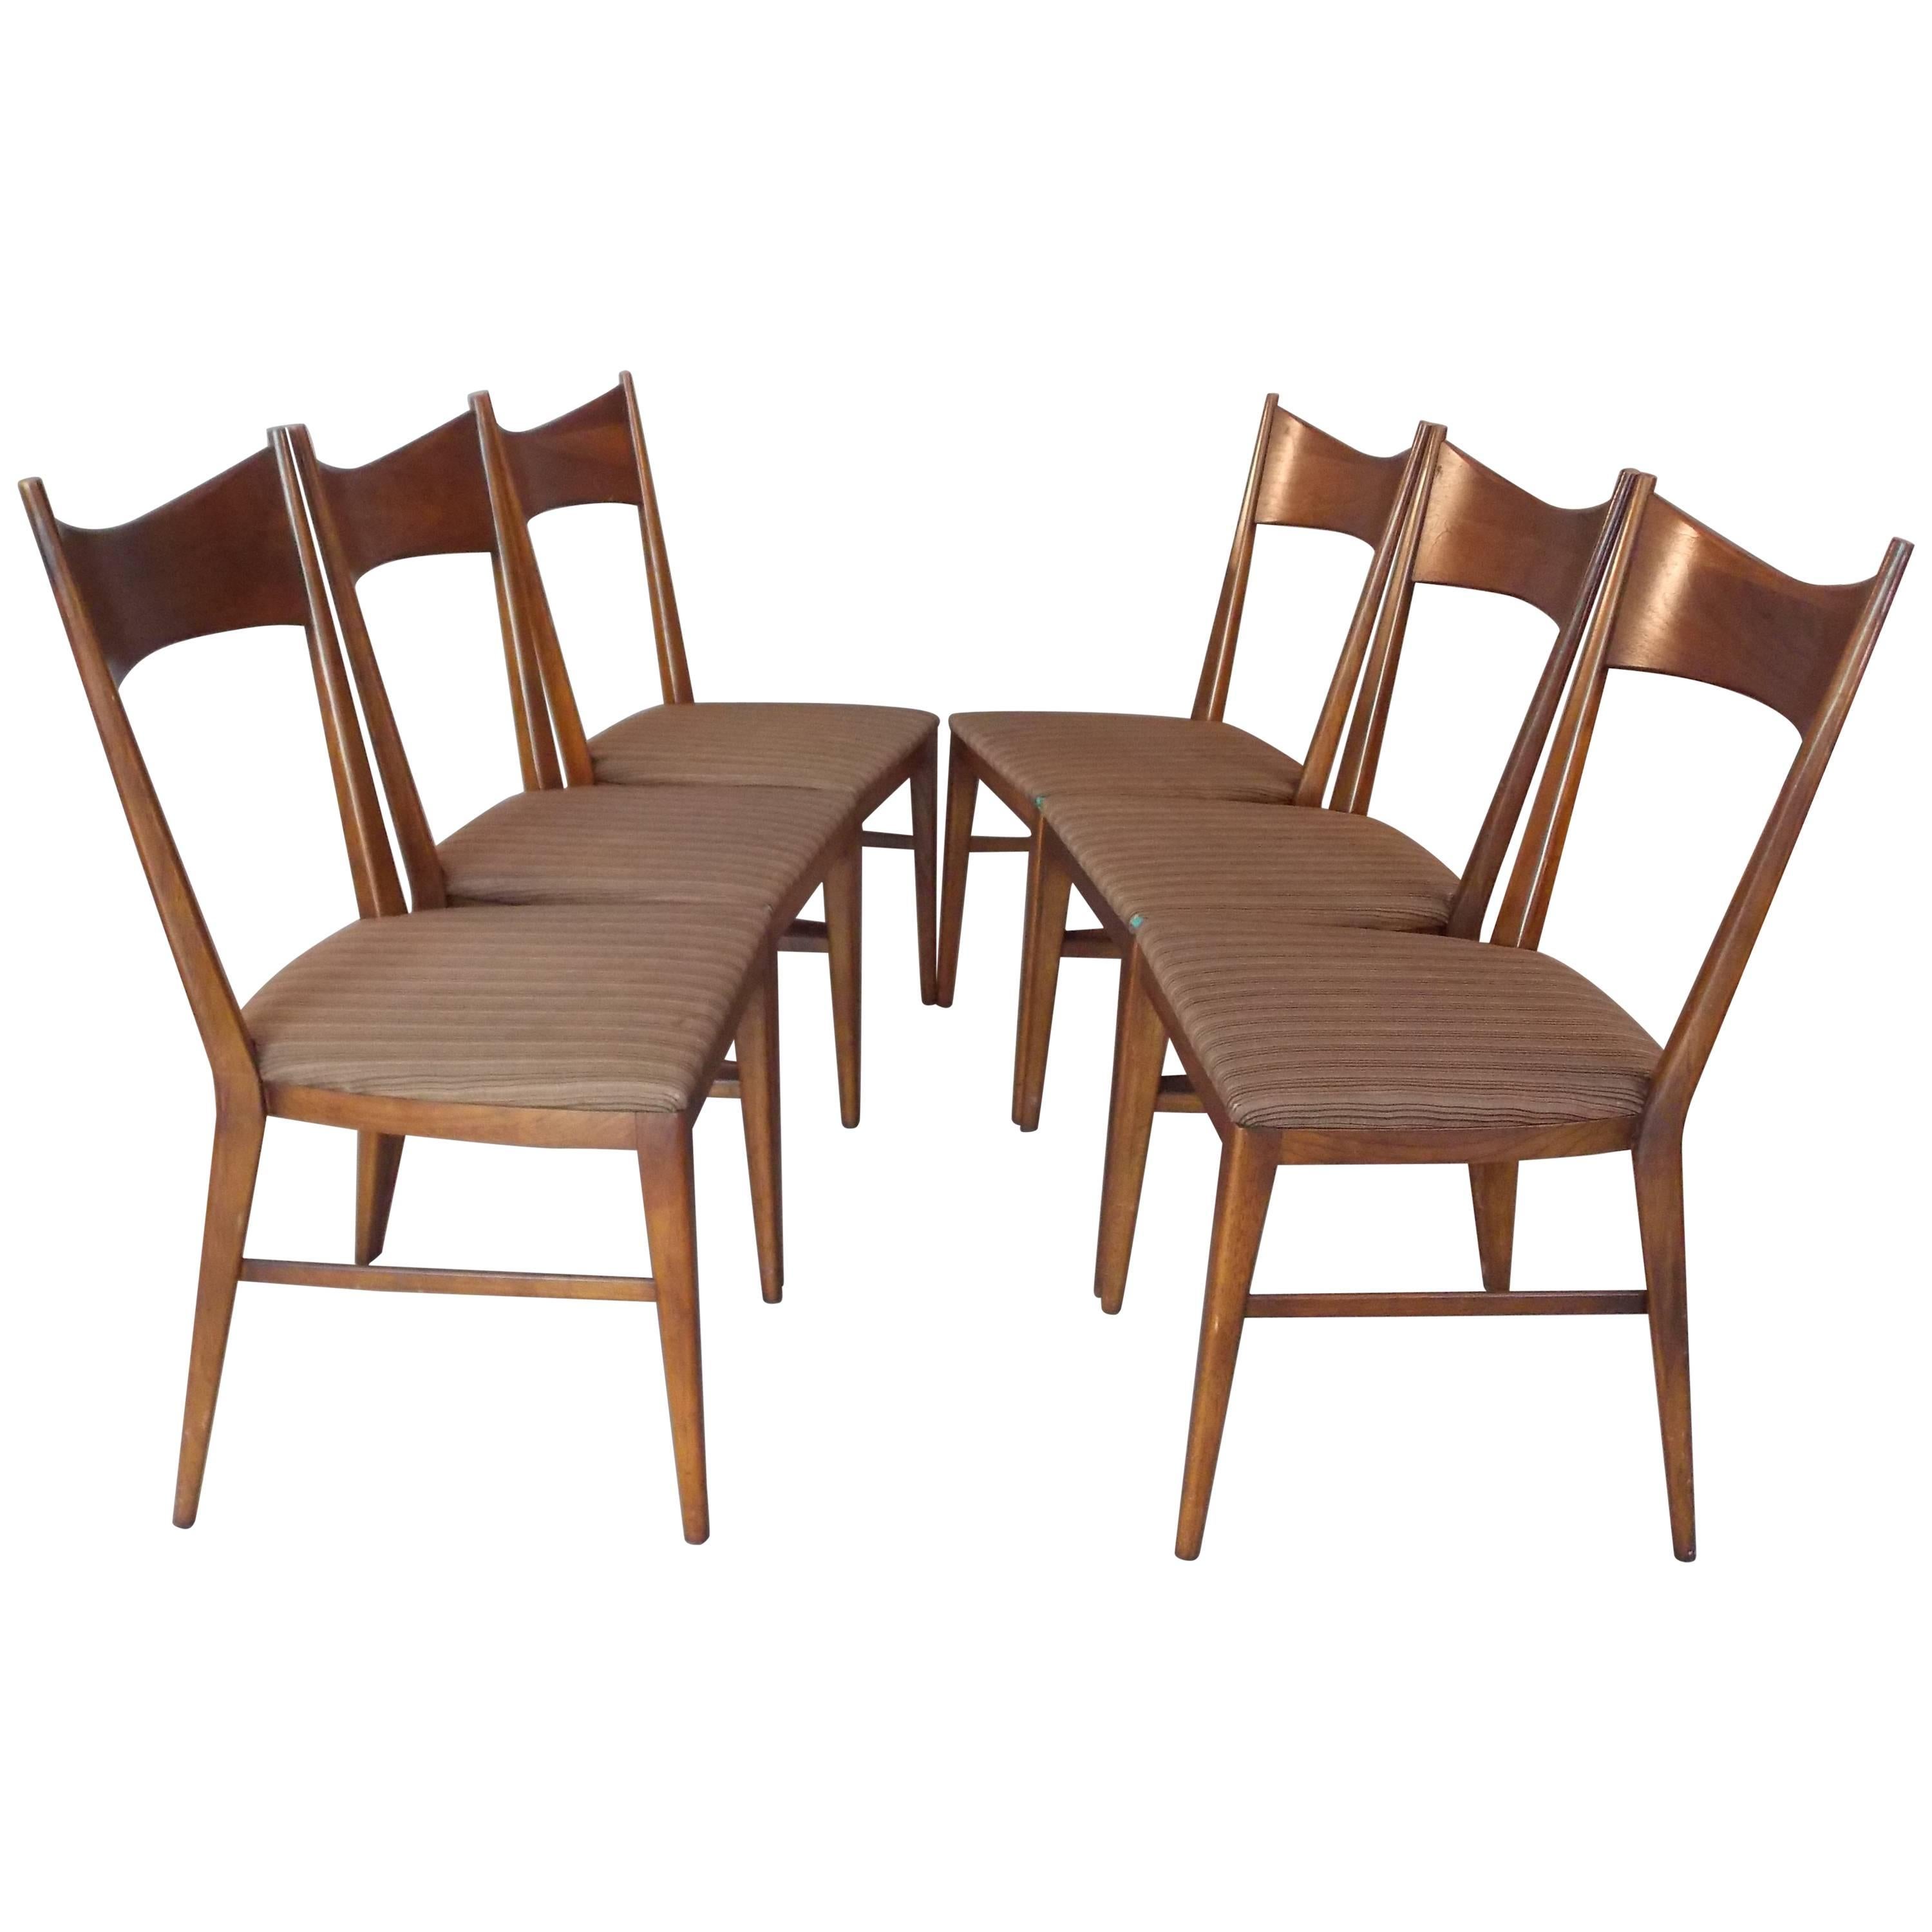 Six Paul McCobb Dining Chairs for Calvin Furniture, 1950's